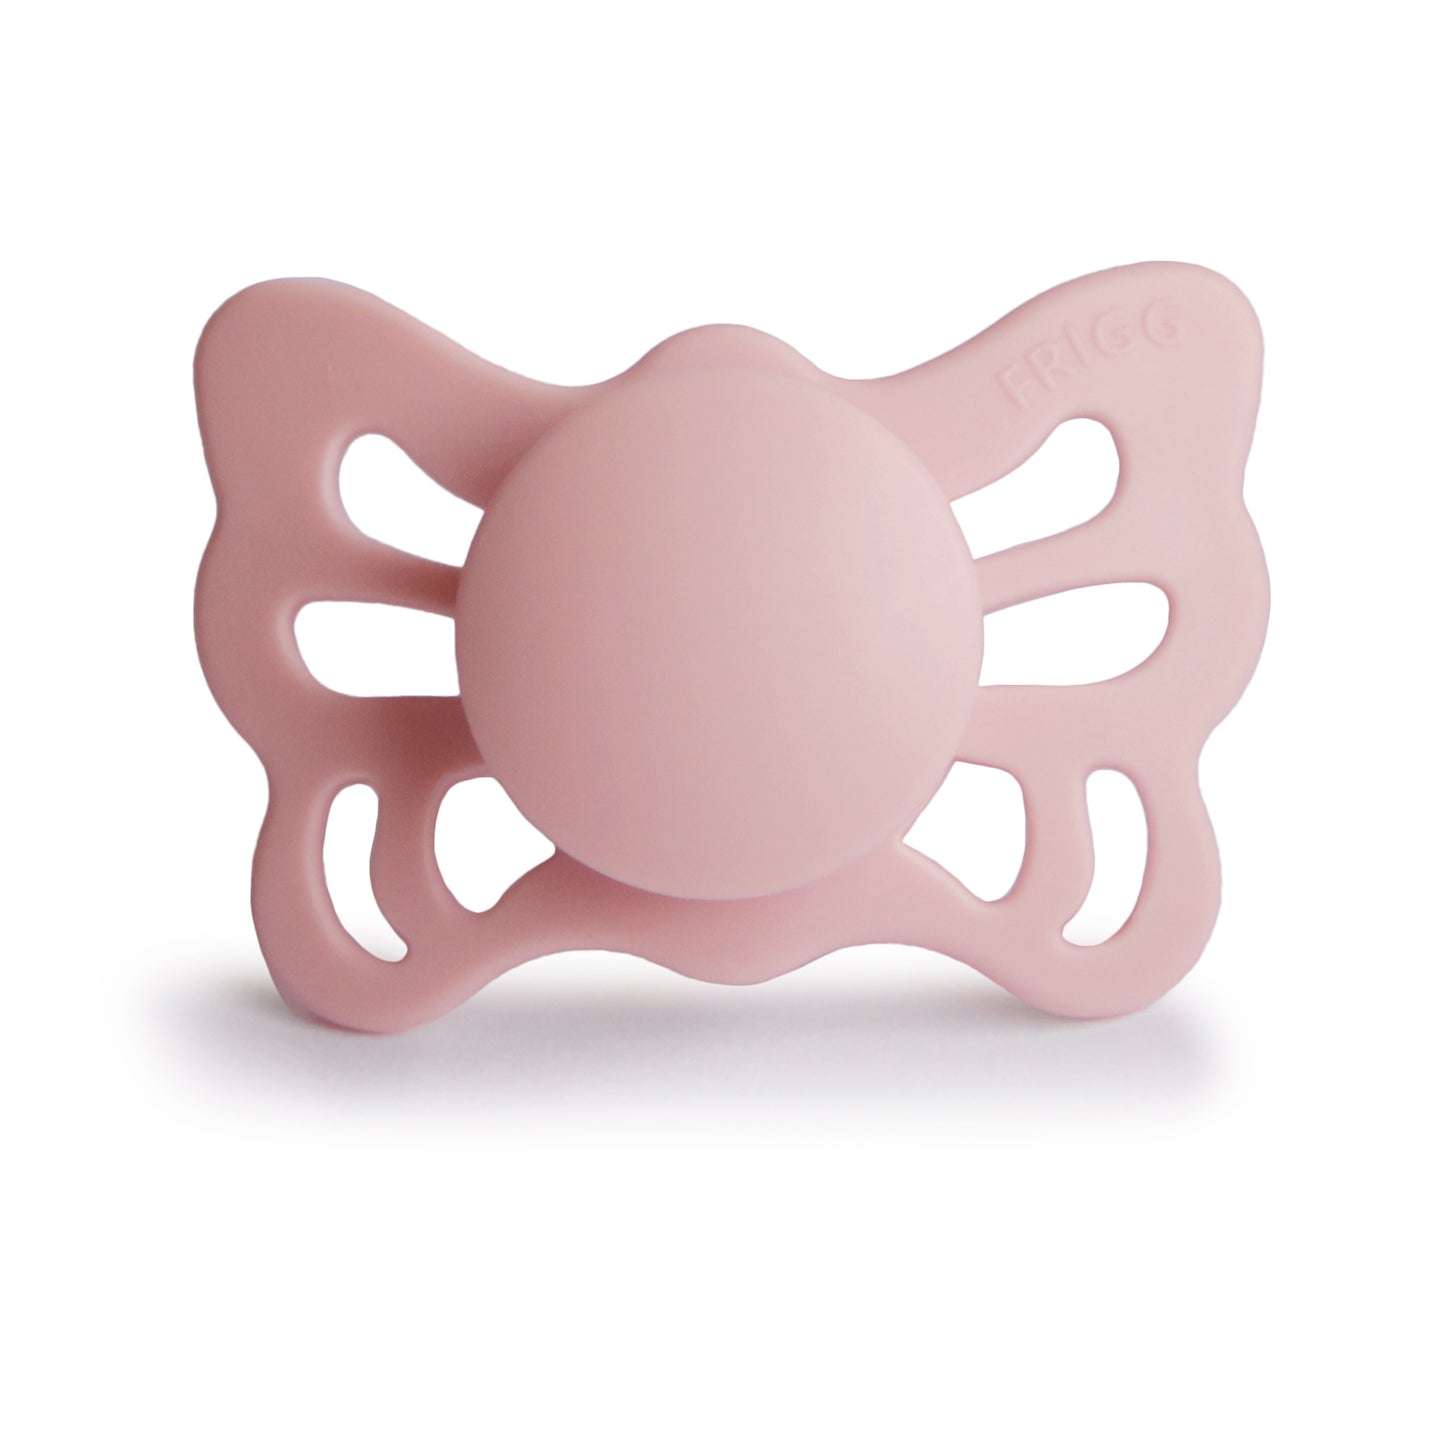 Frigg pacifier - Butterfly, anatomical, silicone size 1 and 2